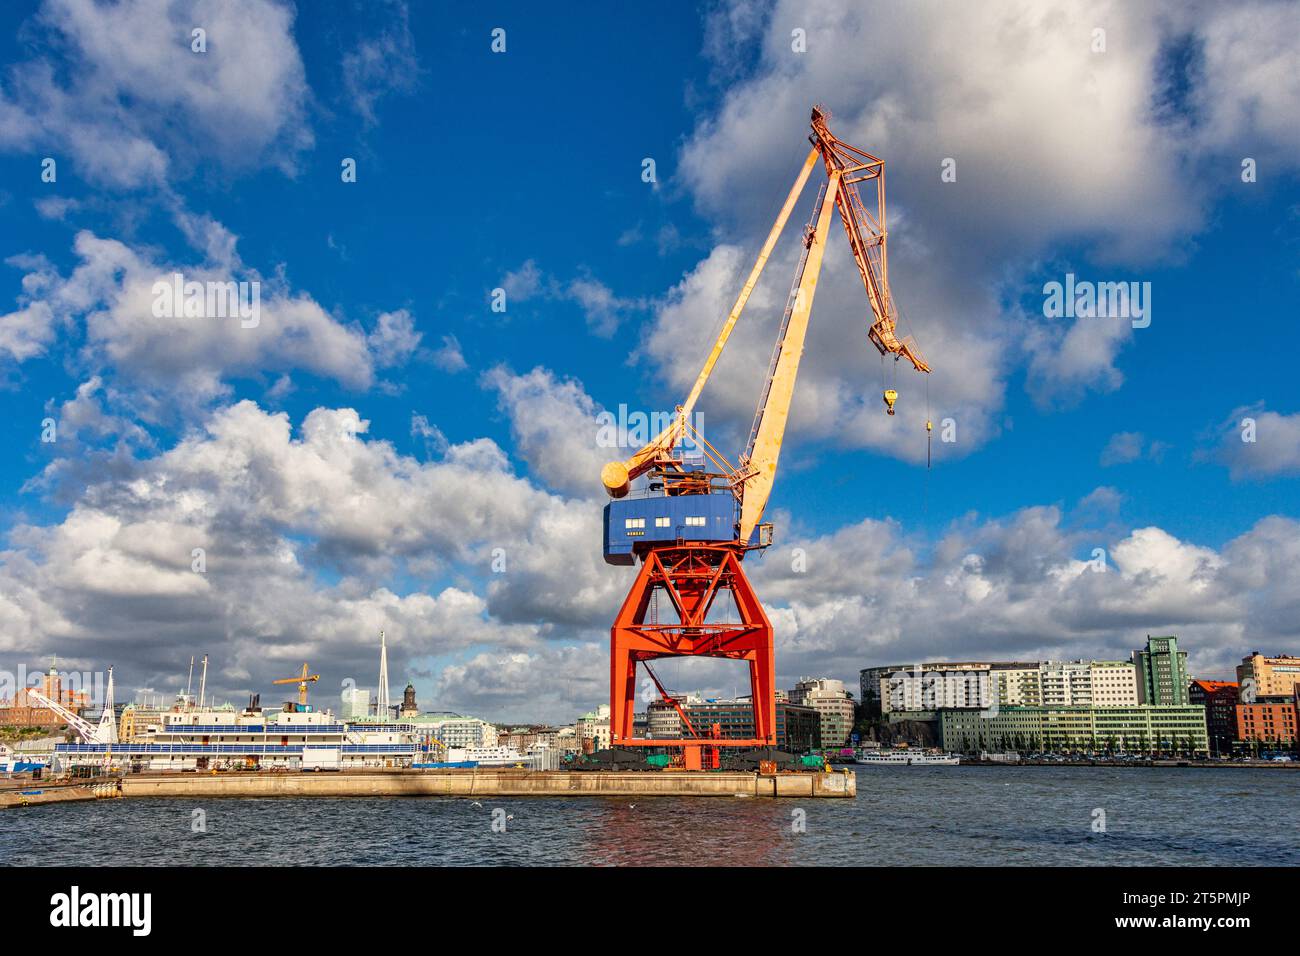 Cranes loading and unloading containers from commercial ships at Gothenburg cargo port. Gothenburg, Sweden Stock Photo